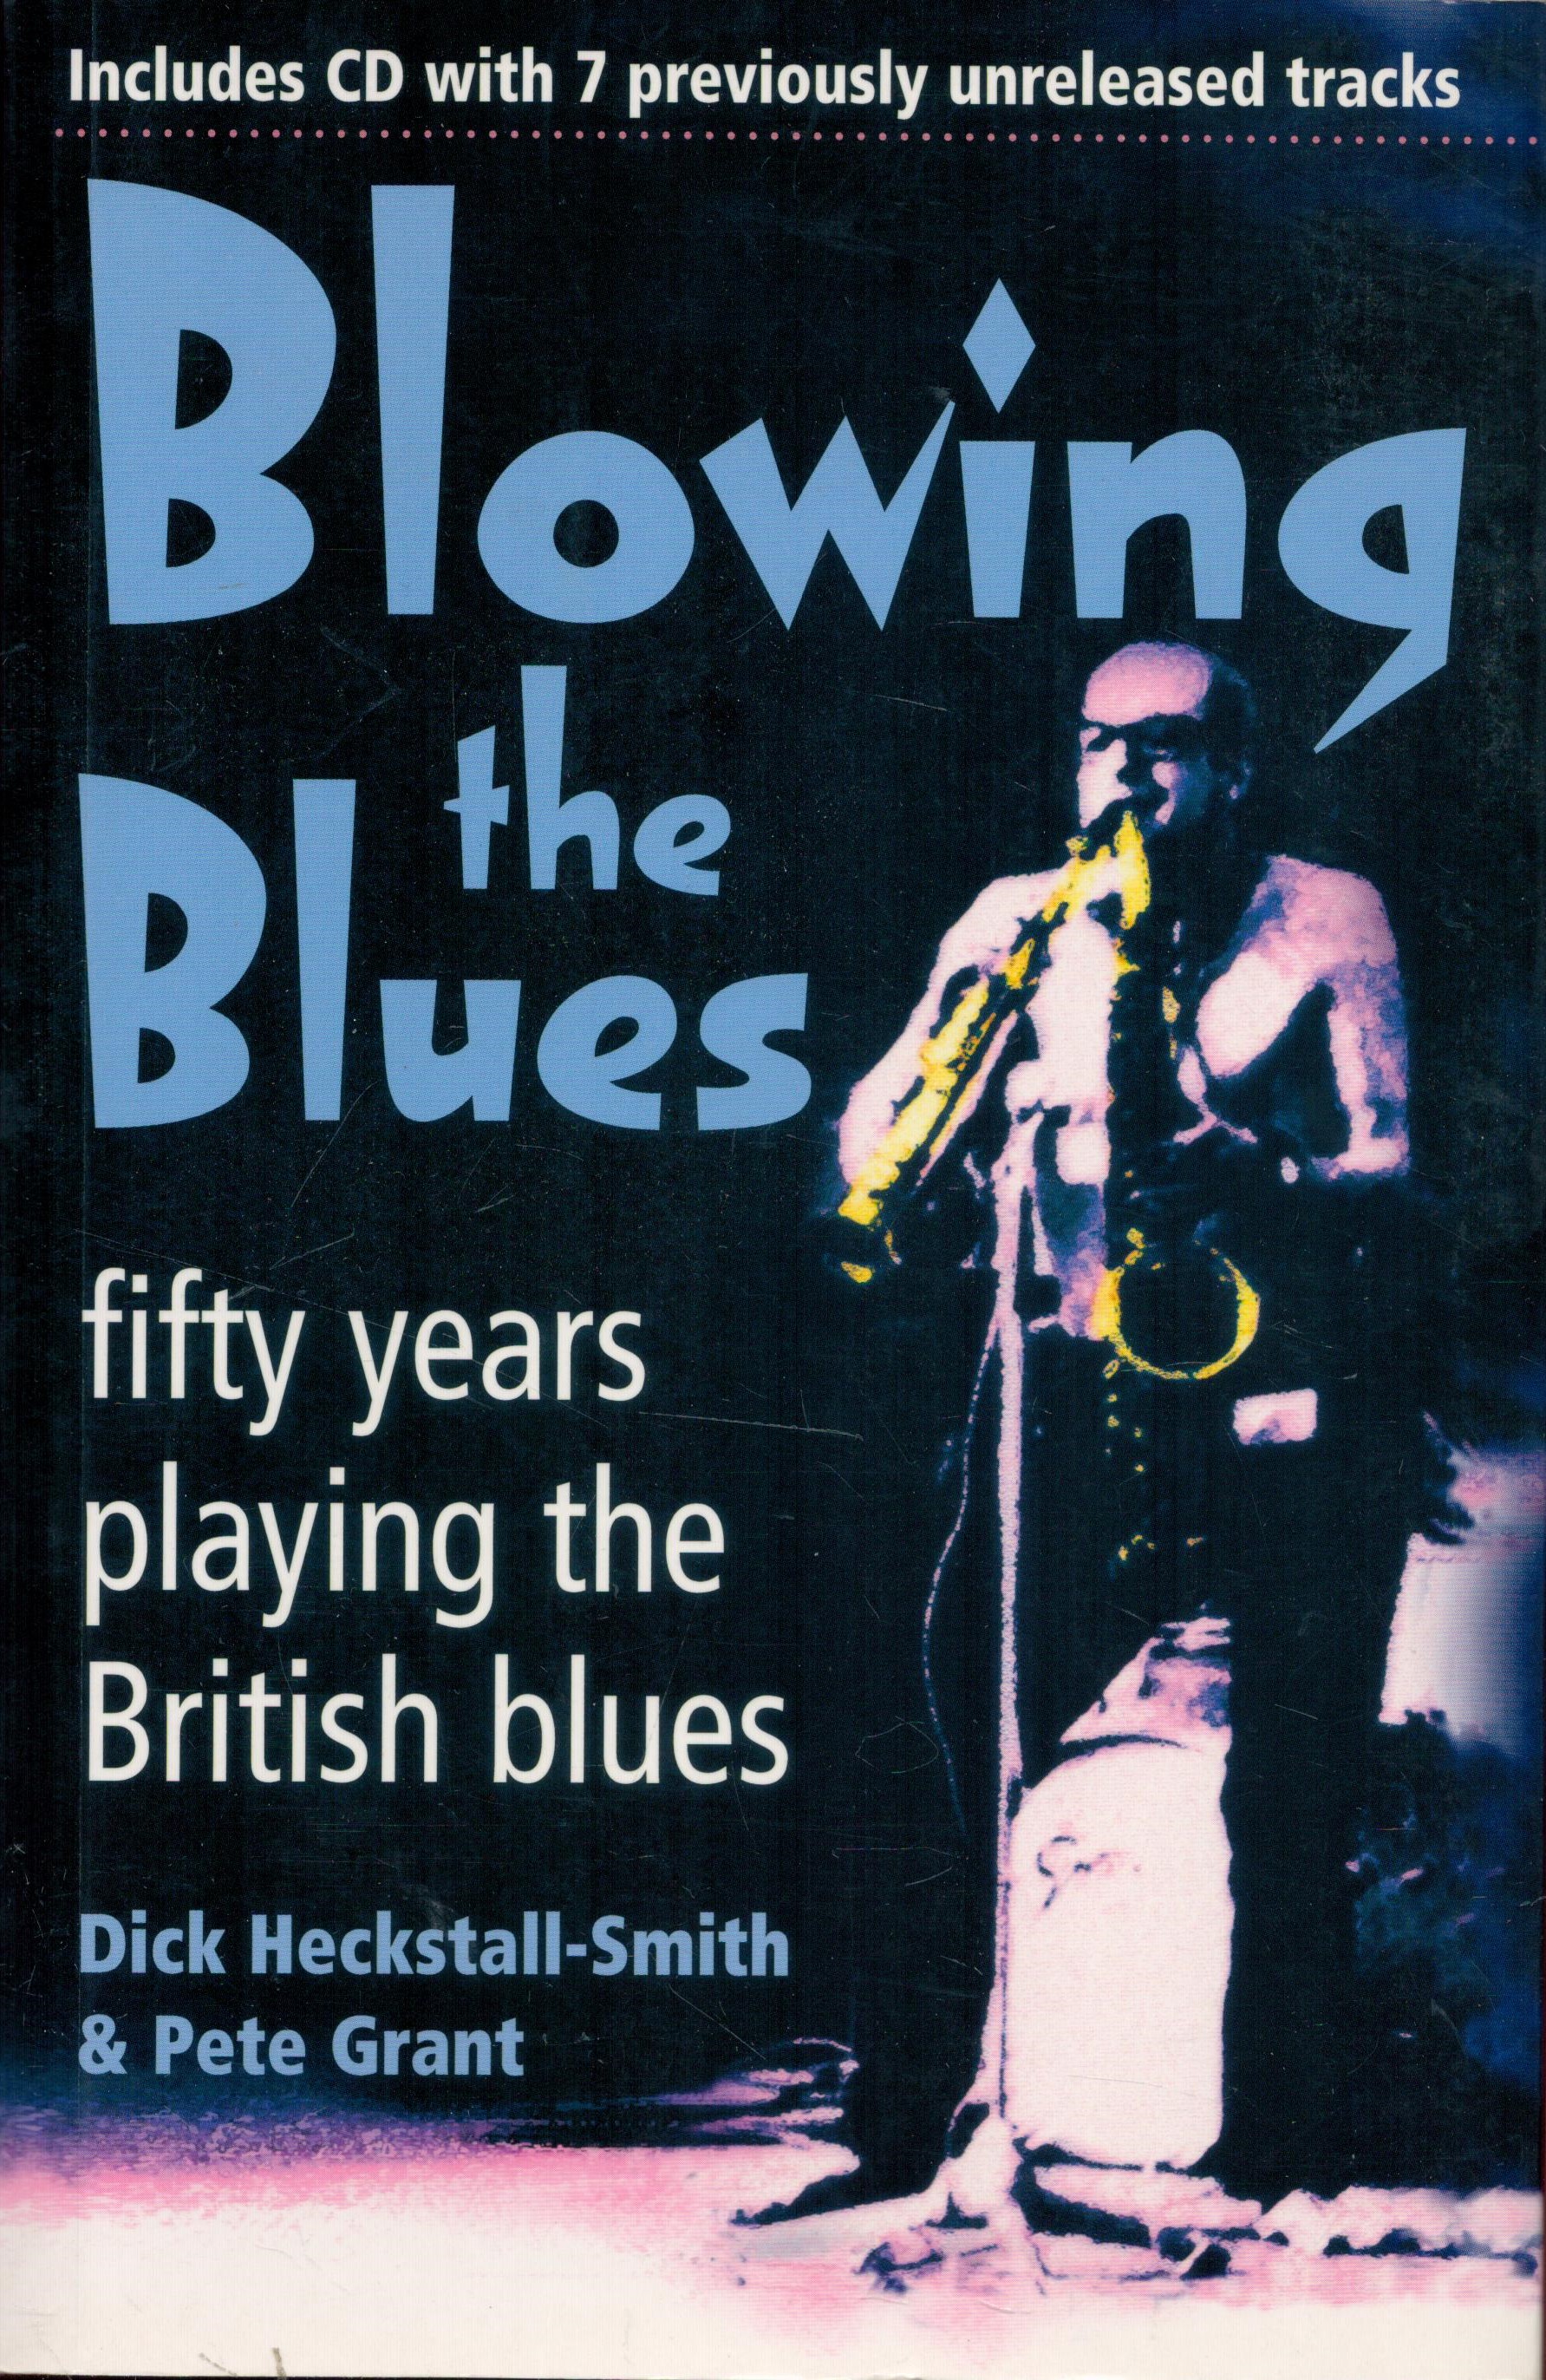 Blowing The Blues Fifty Years Playing the British Blues by Dick Heckstall Smith and Pete Grant First